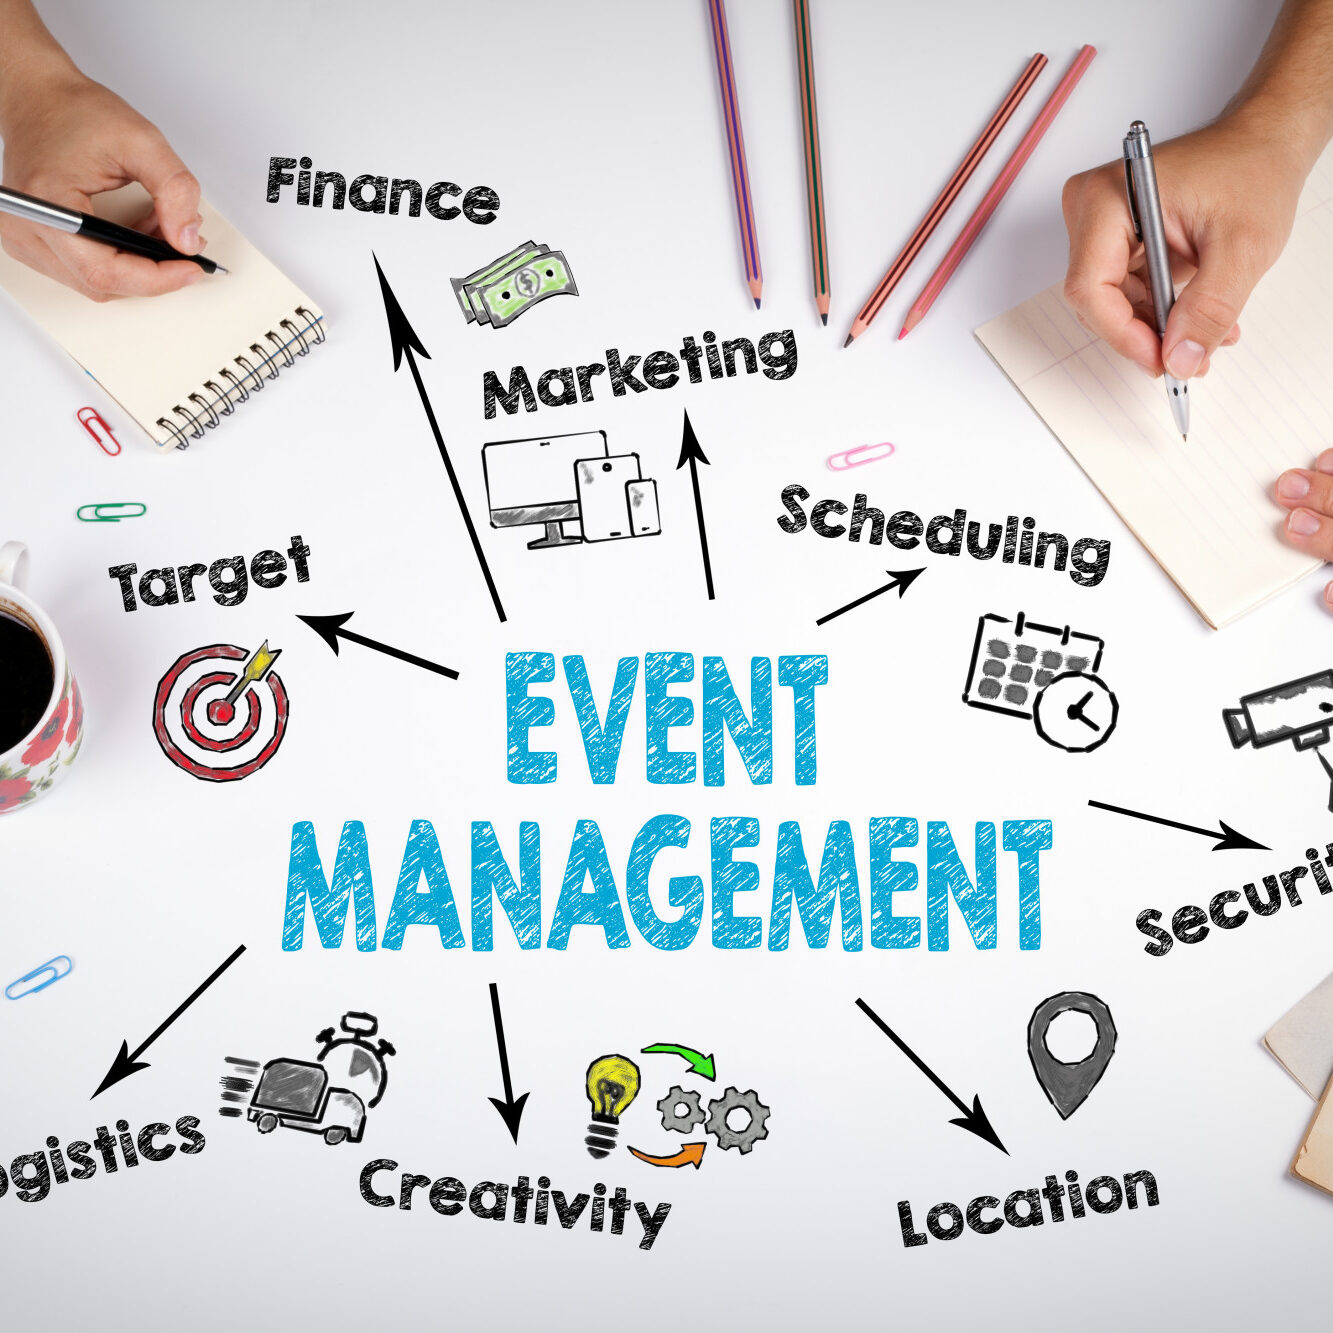 Event management Concept. The meeting at the white office table.